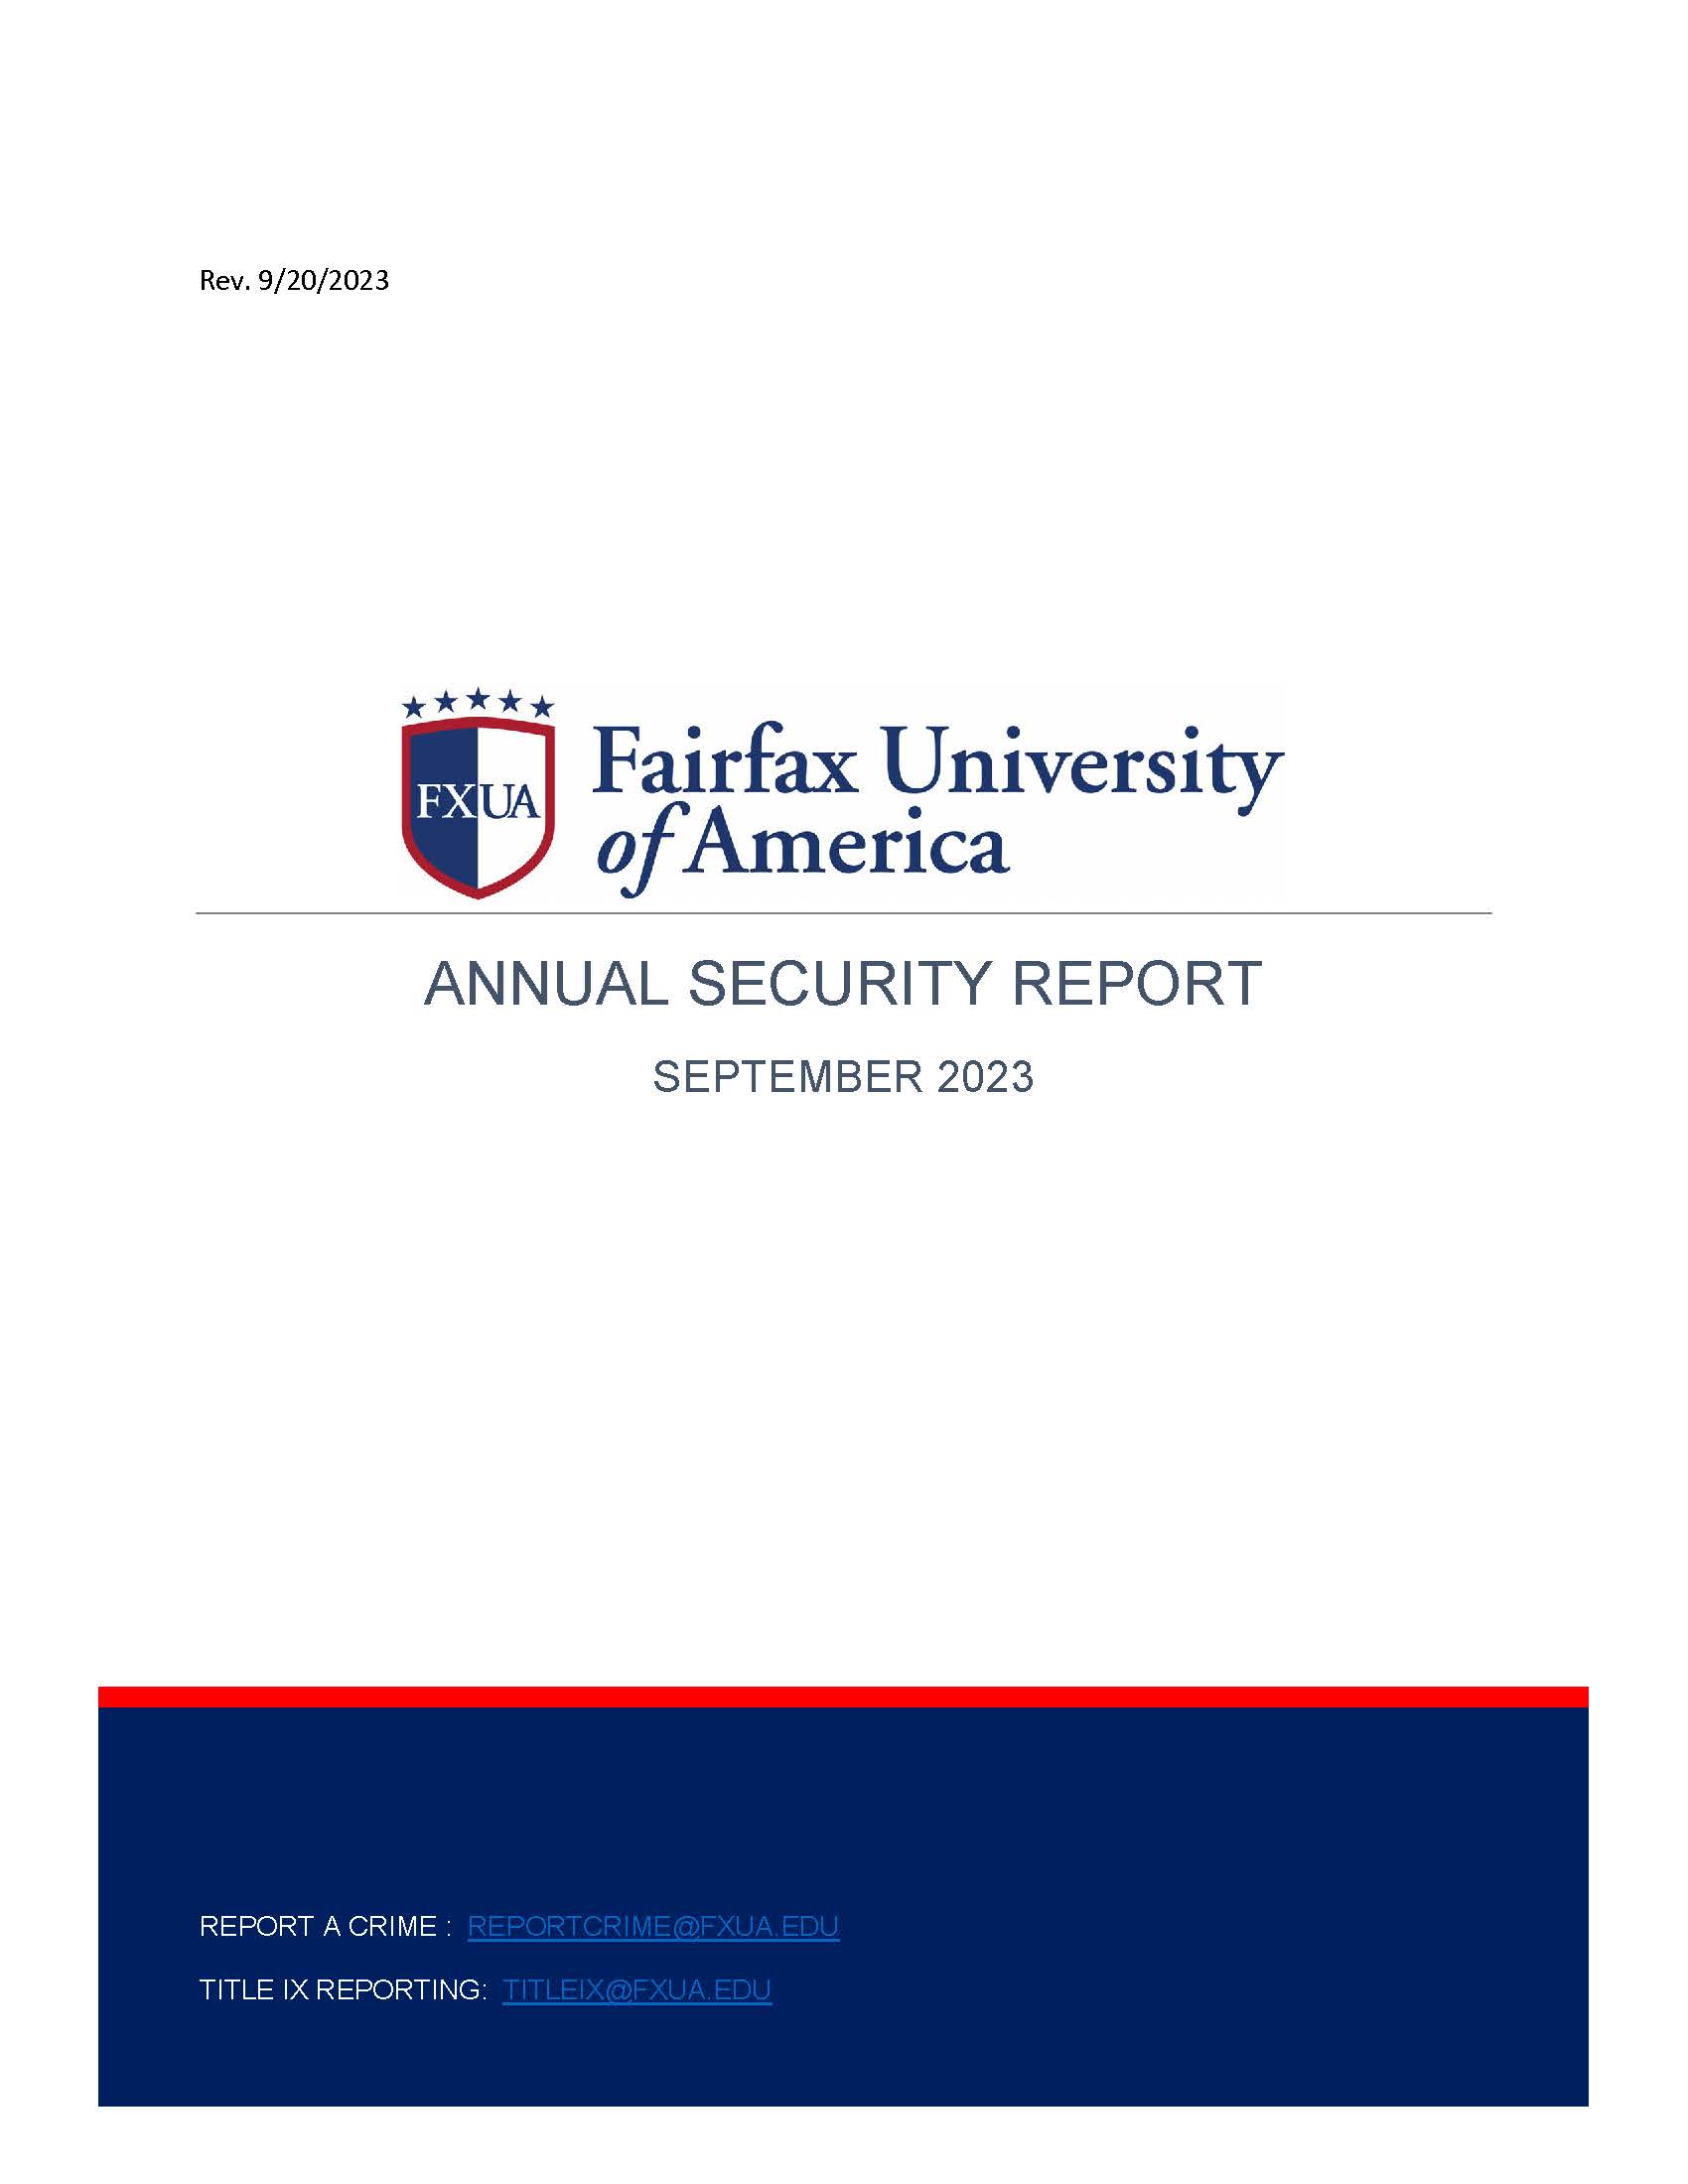 2023 Annual Security Report